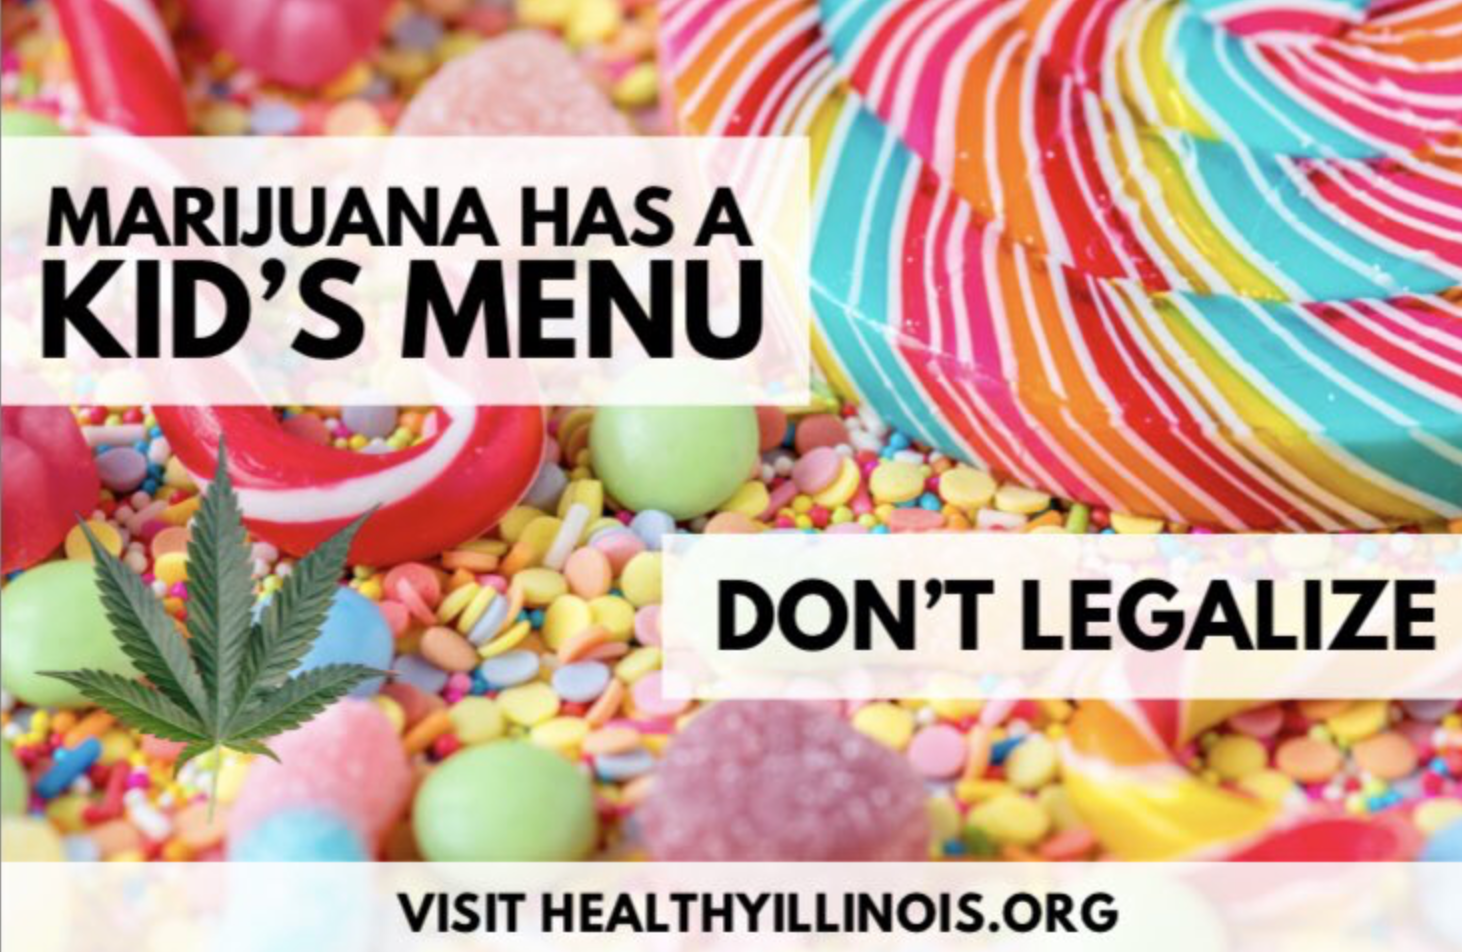 Community Leaders, Healthy and Productive Illinois Discuss Implications of Commercialized Pot, Launch Ad Campaign